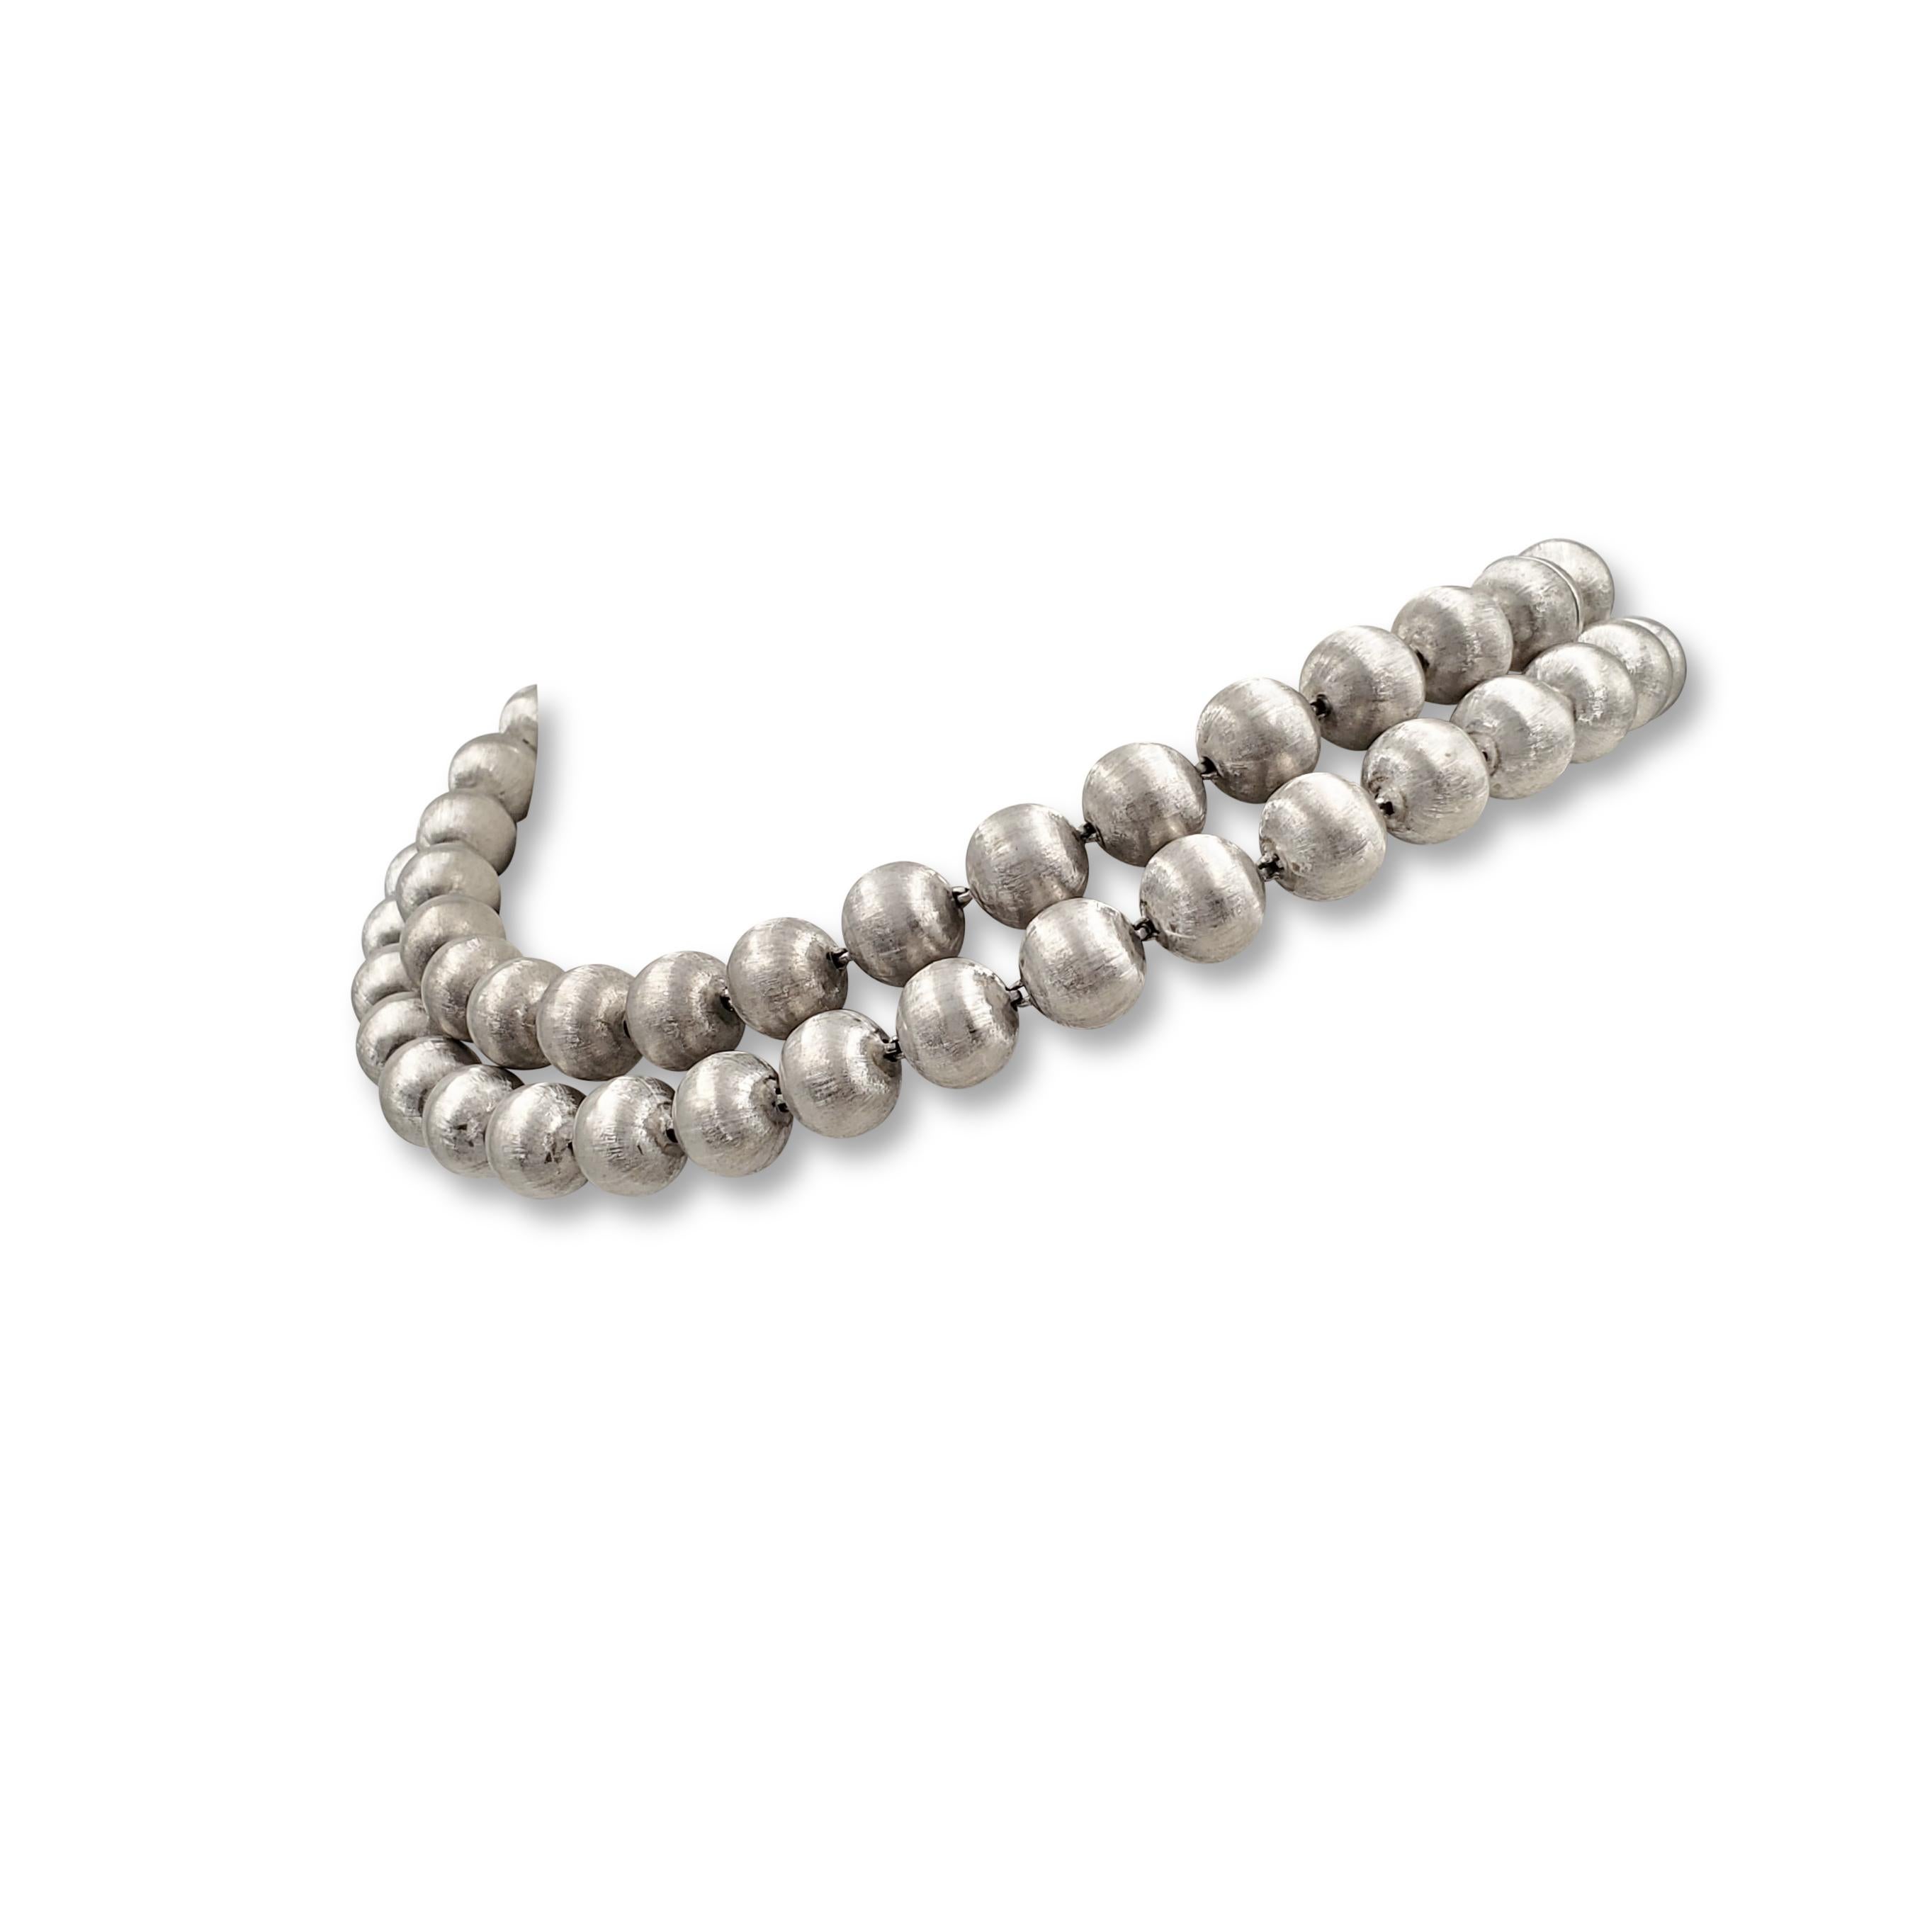 Authentic Buccellati 'Rigato' convertible necklace composed of 18 karat white gold beads with a lustrous florentine finish. The set can be worn as two necklaces measuring 18 1/2 inches and 16 1/2 inches separately or as one long necklace measuring